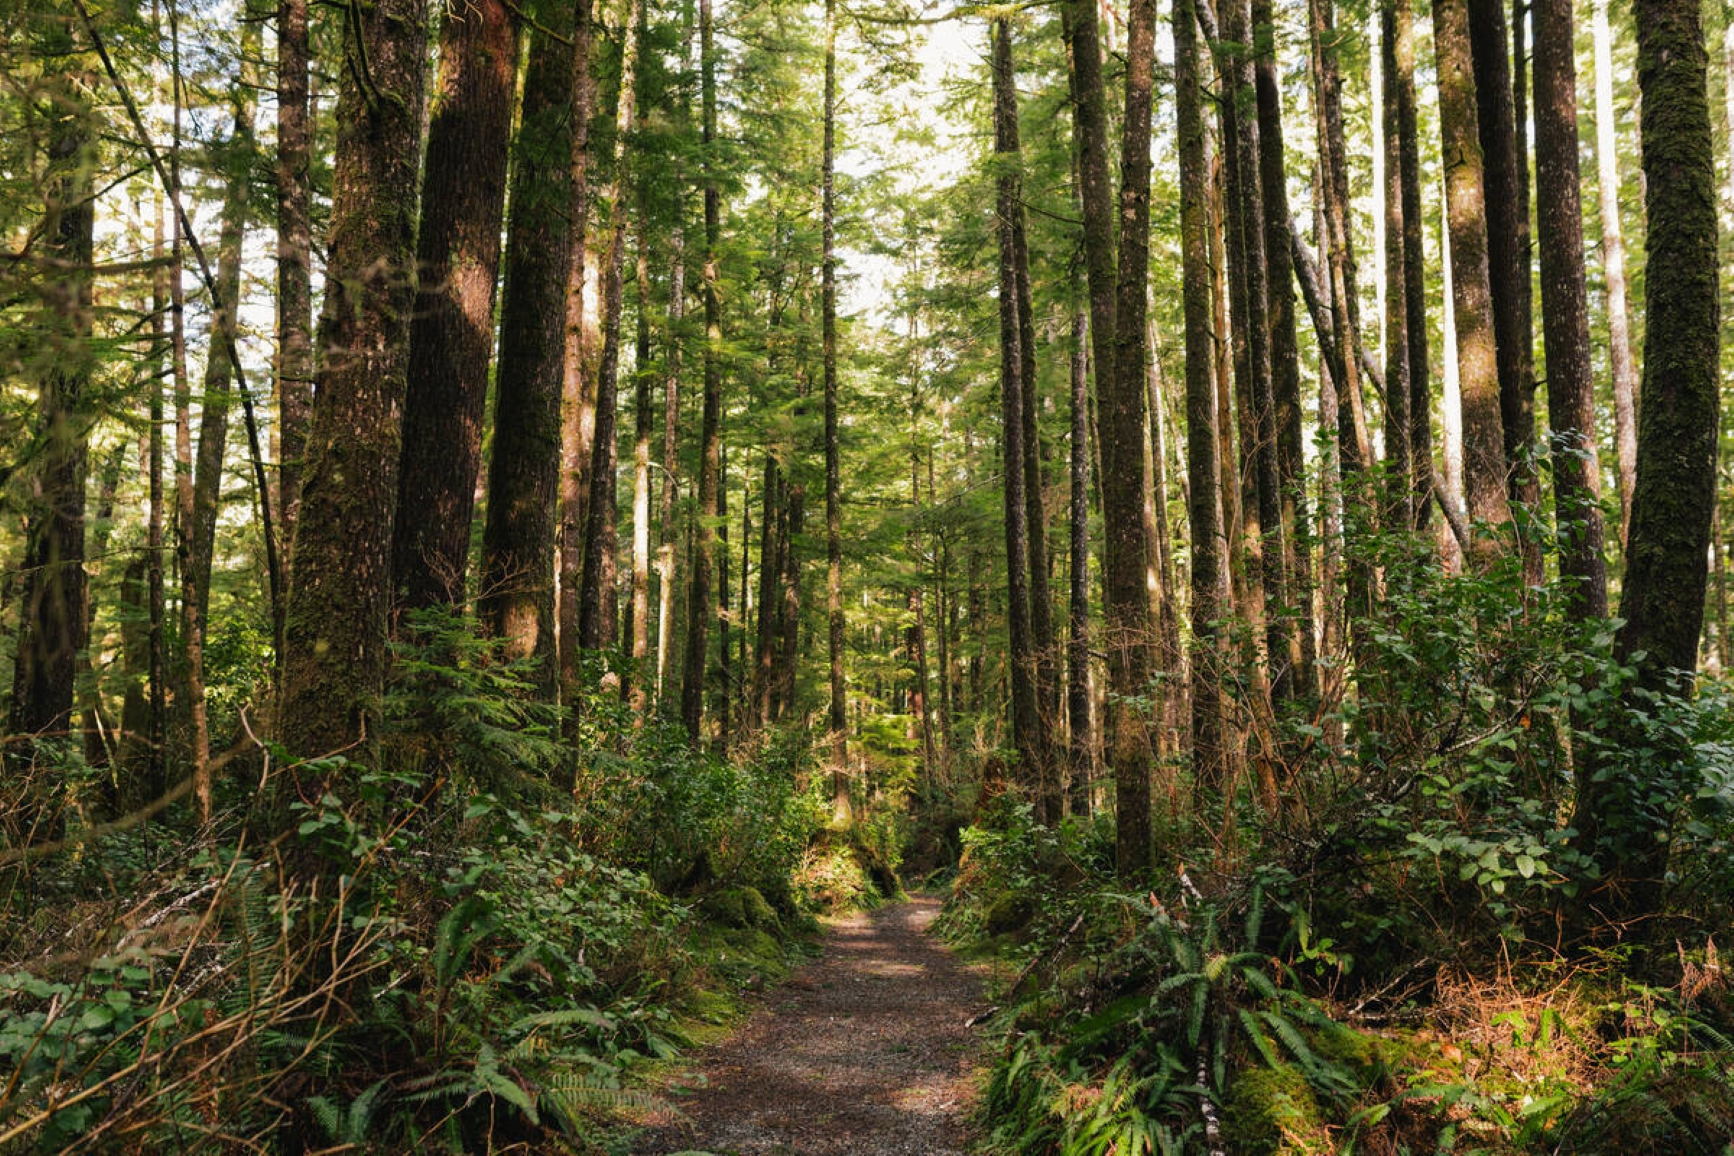 A walking path through the forest. Photo credit: Destination BC